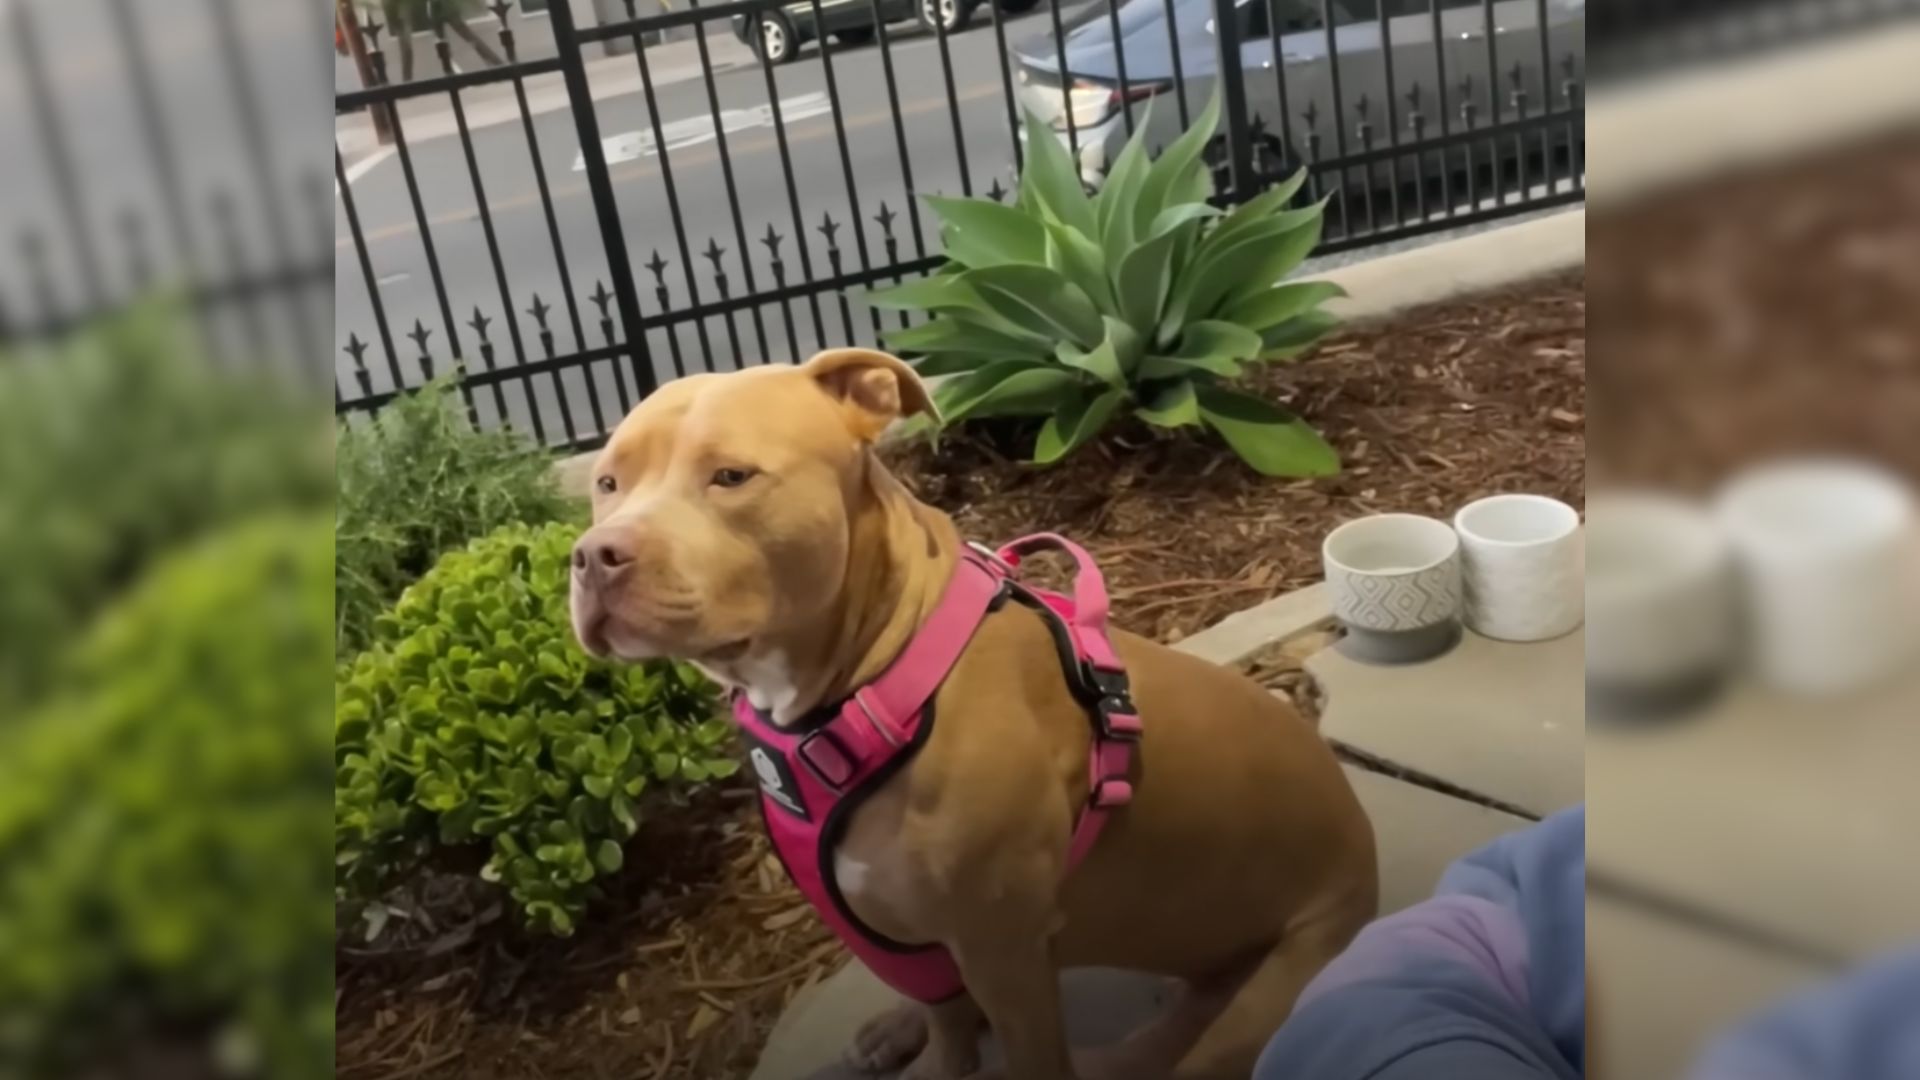 People Would Not Let Their Dogs Play With This Sweet Pittie At The Park